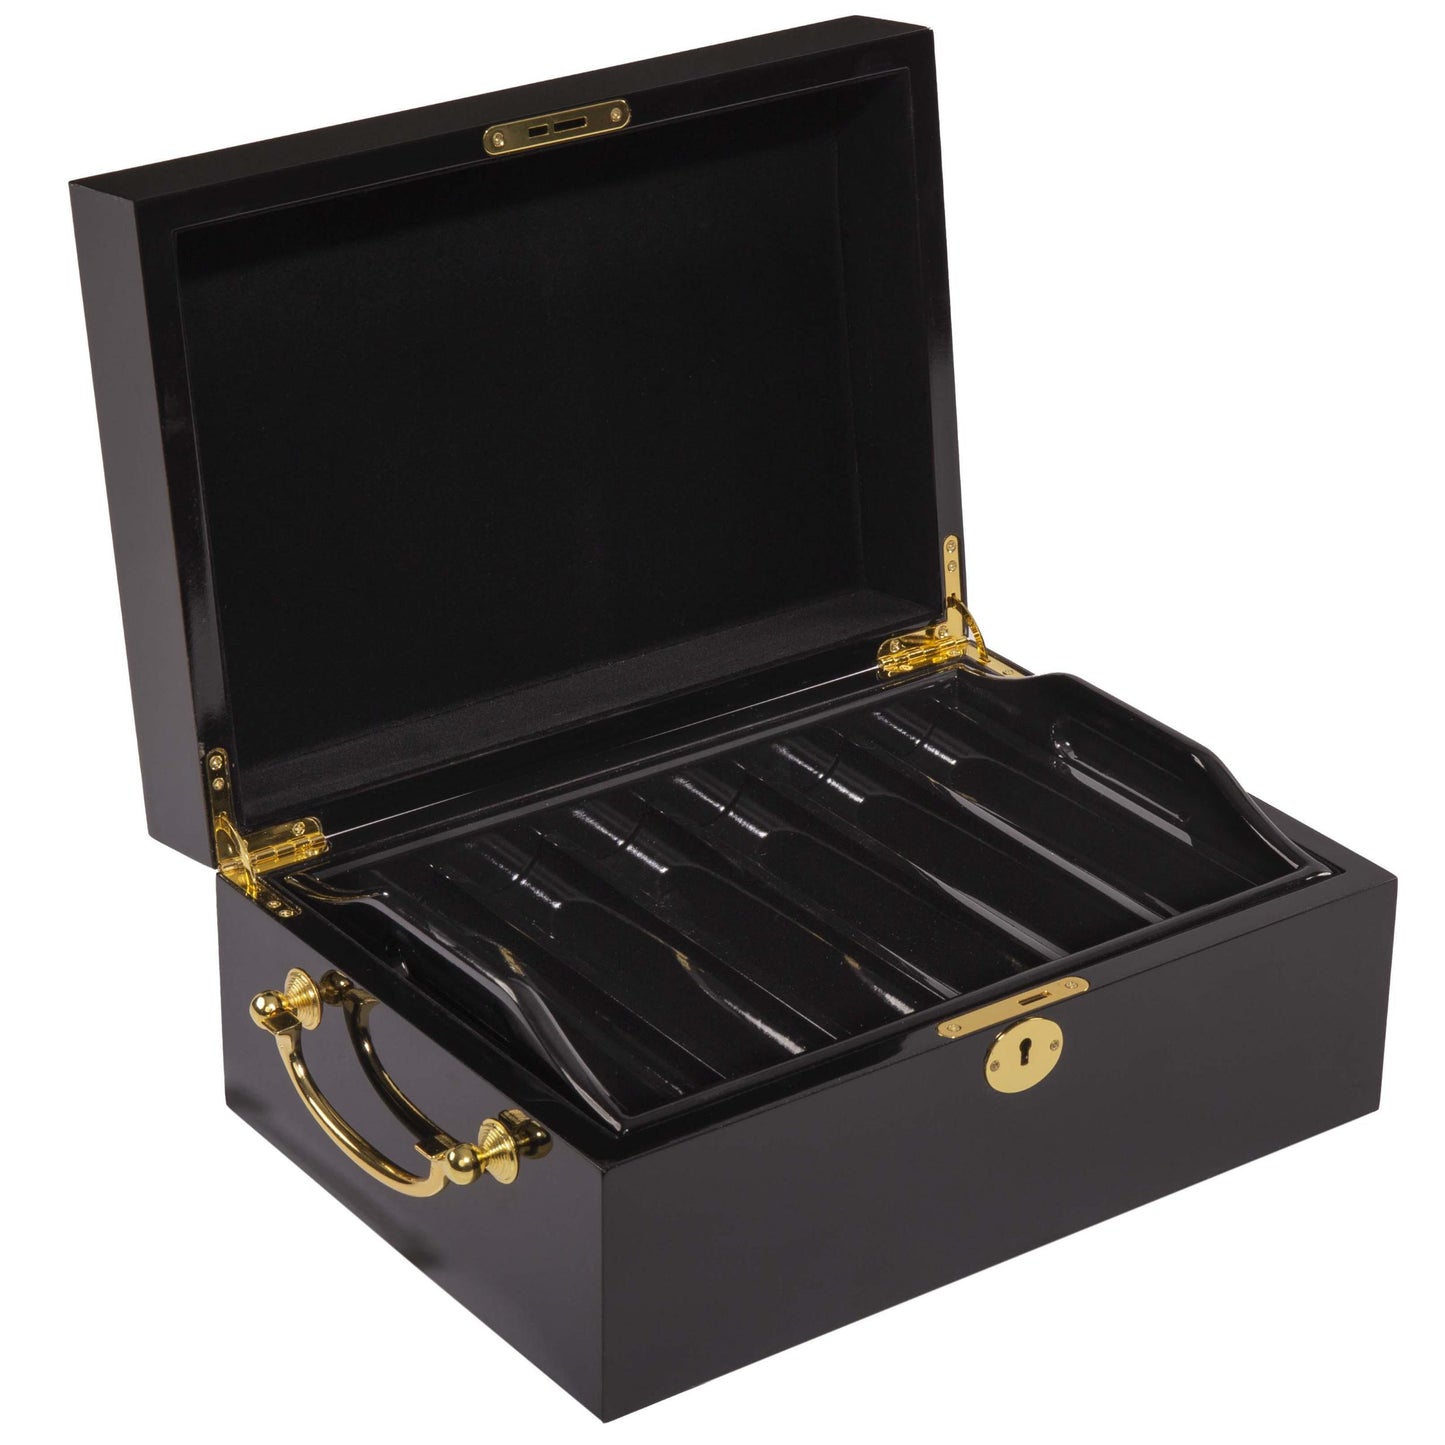 500 Suited Poker Chips with Mahogany Case